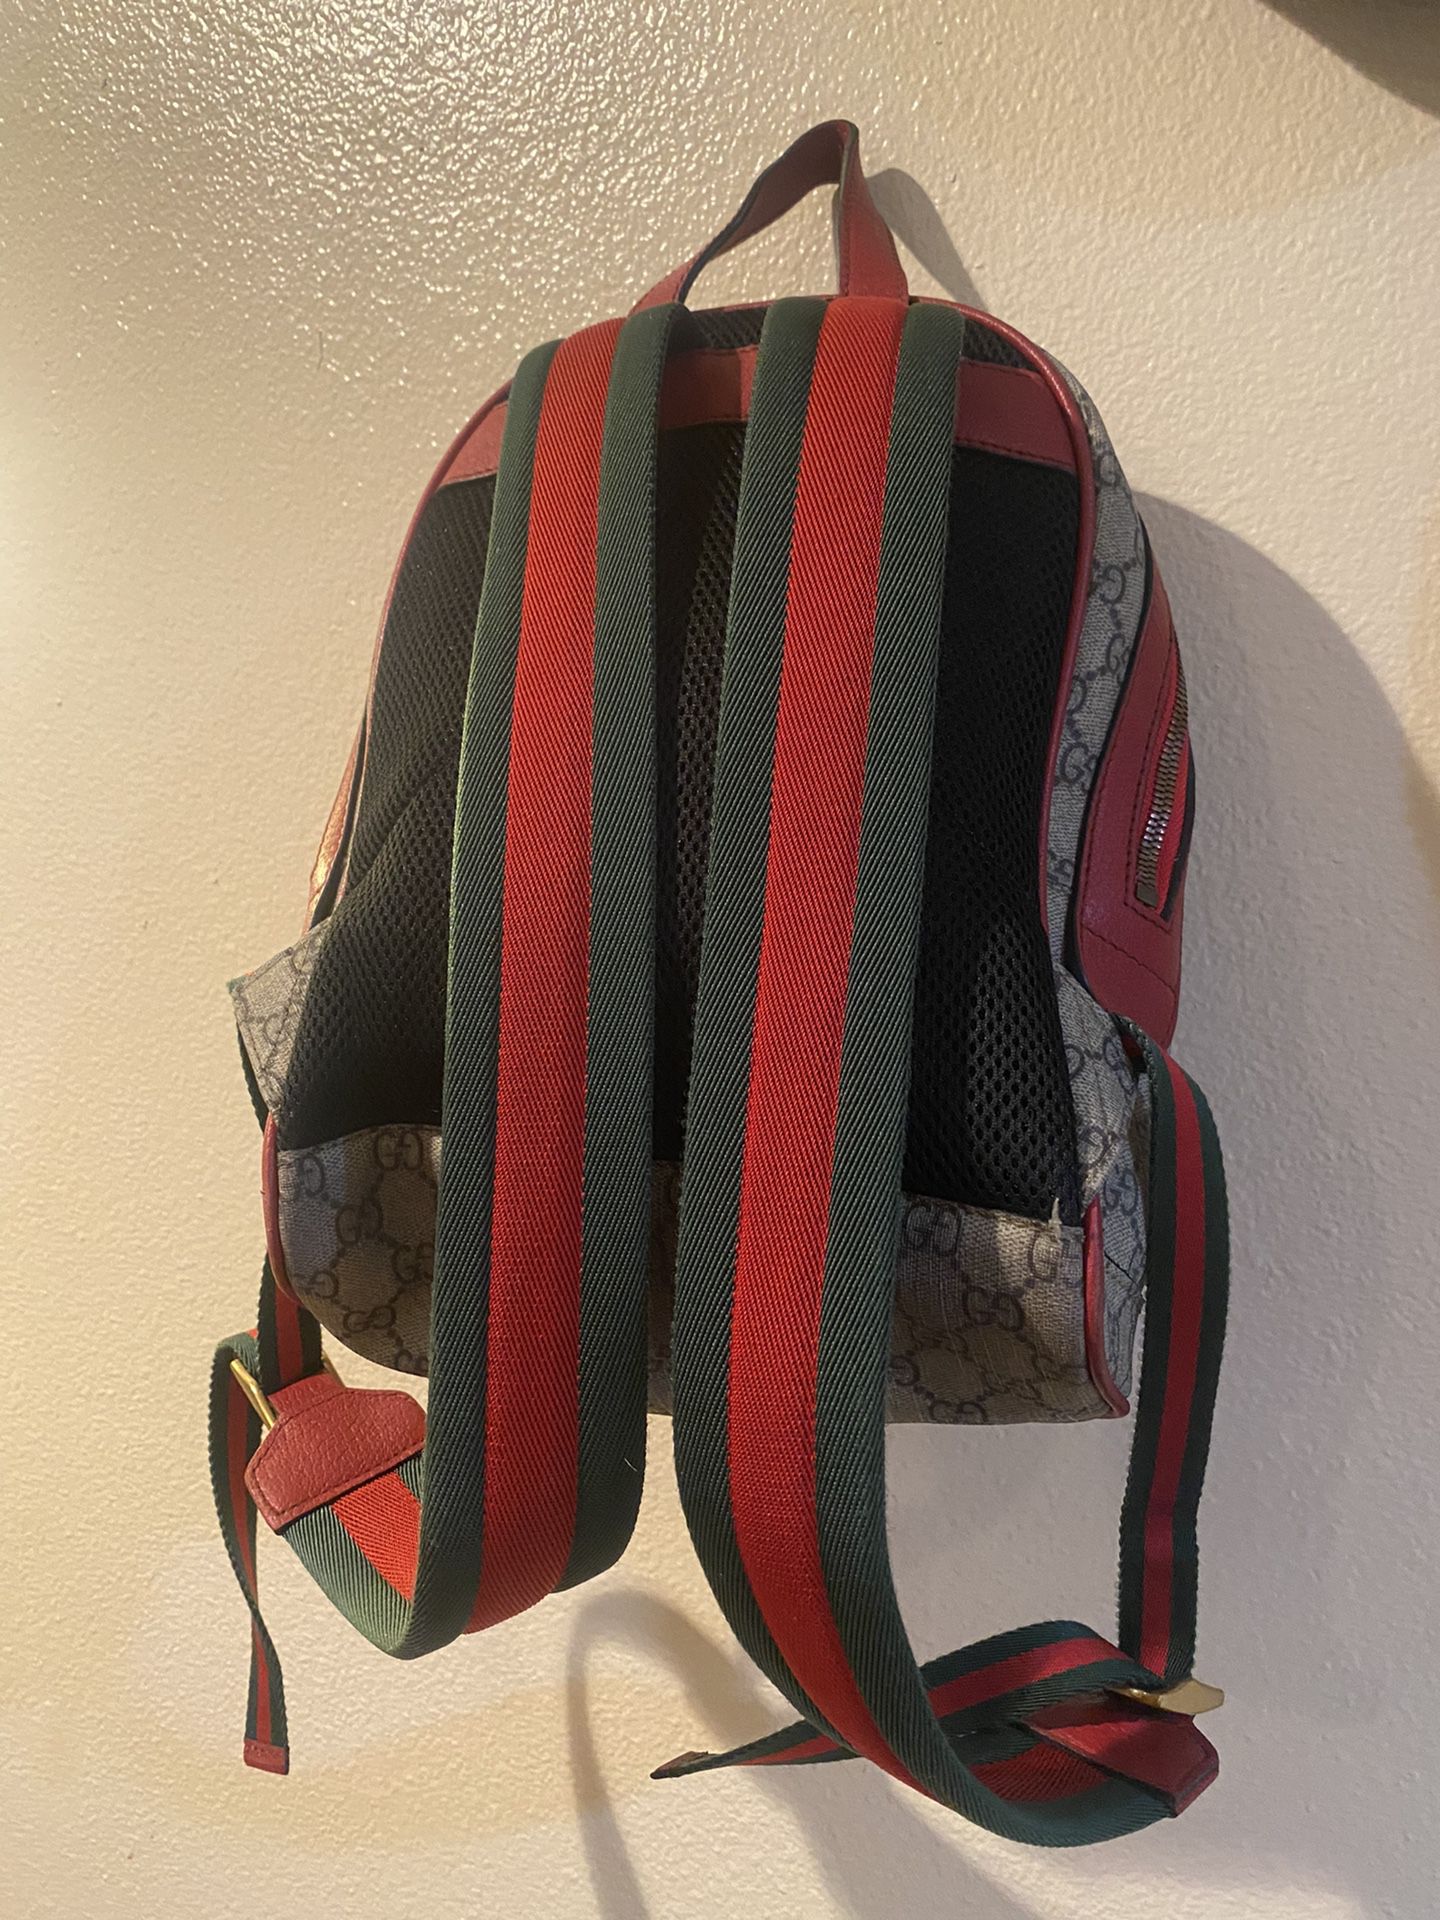 Gucci Backpack (large) for Sale in Mesa, AZ - OfferUp